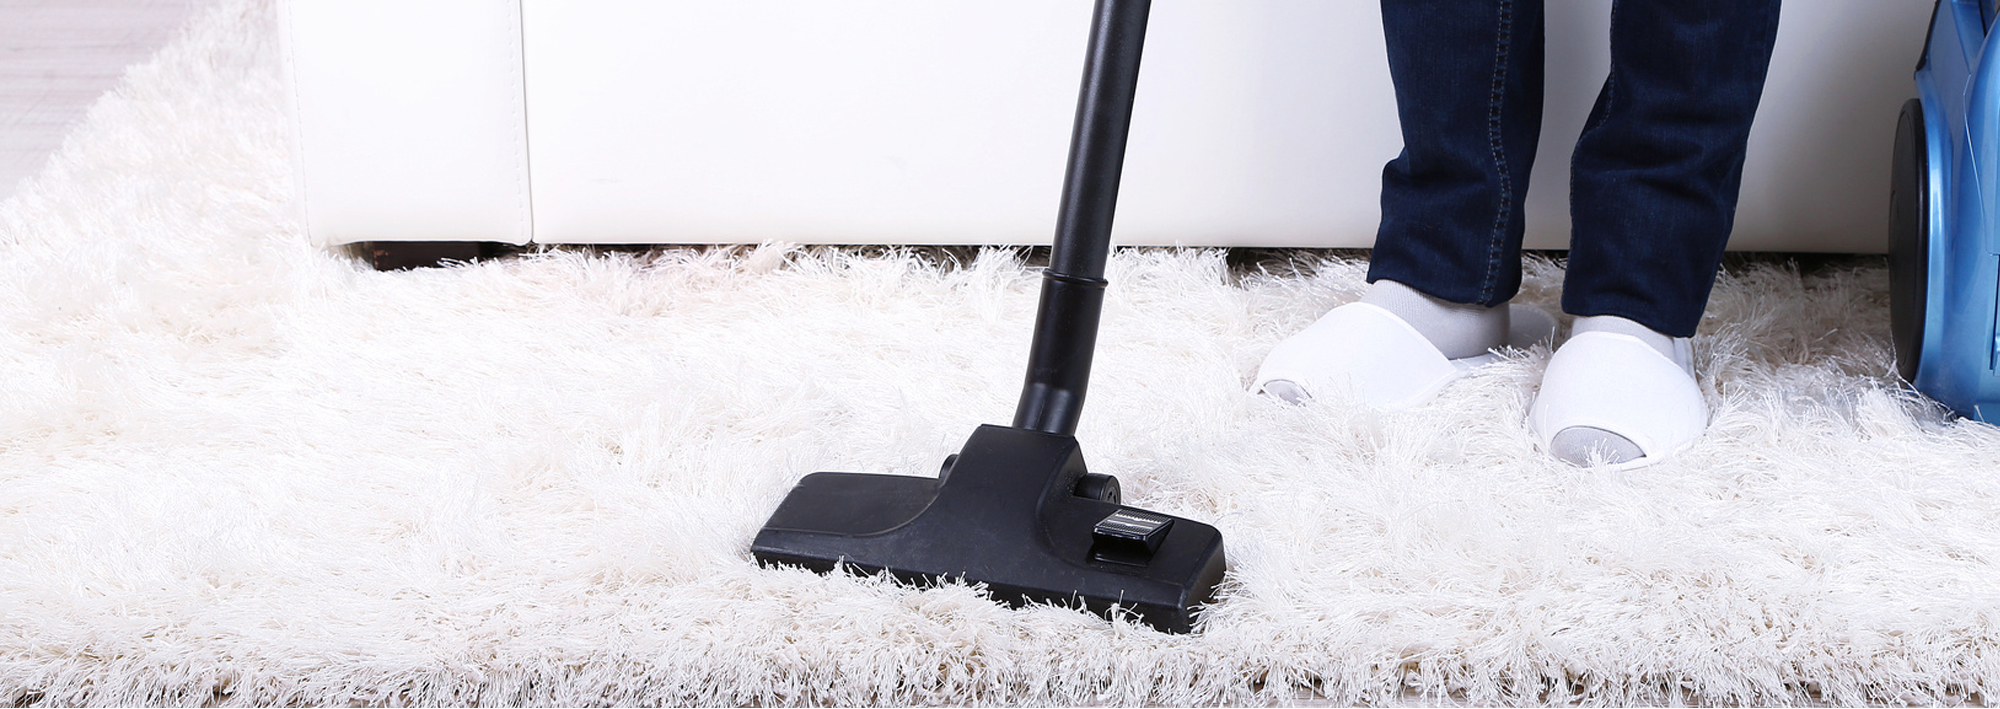 Standard Contract for Carpet Cleaning Services